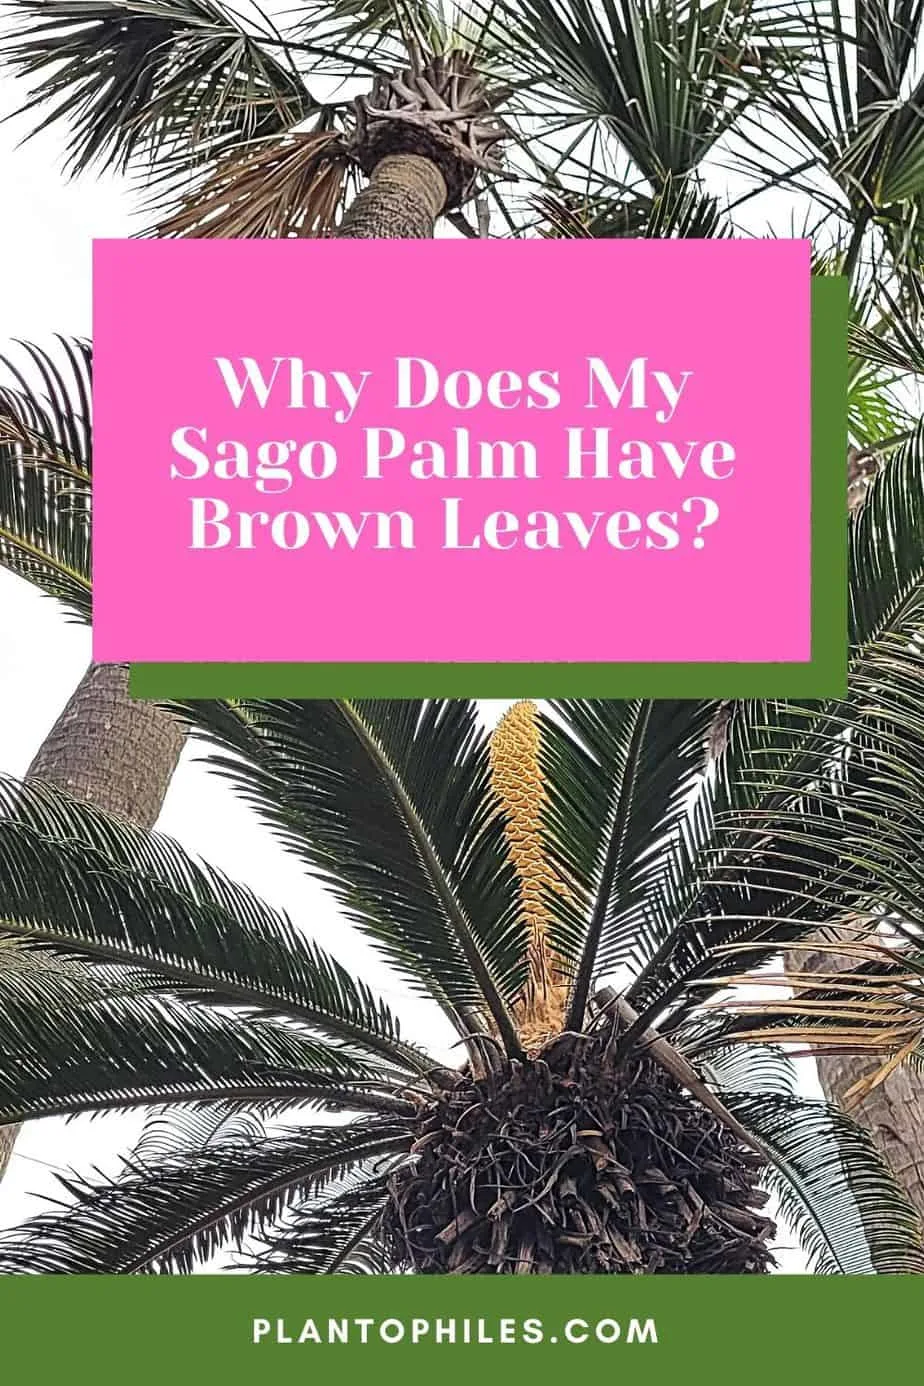 Why Does My Sago Palm Have Brown Leaves?